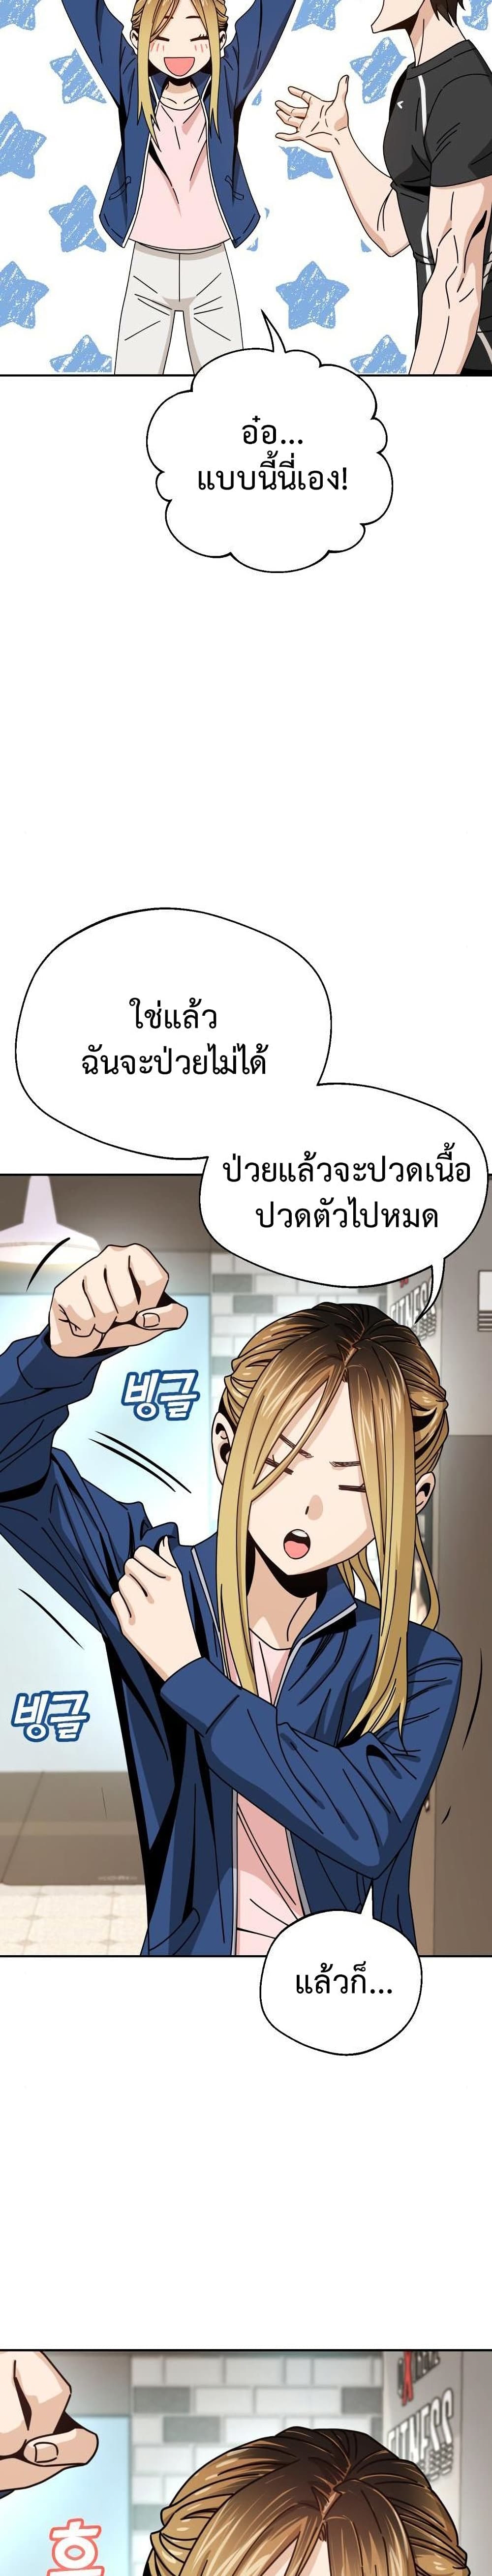 Match Made in Heaven by chance ตอนที่ 28 07